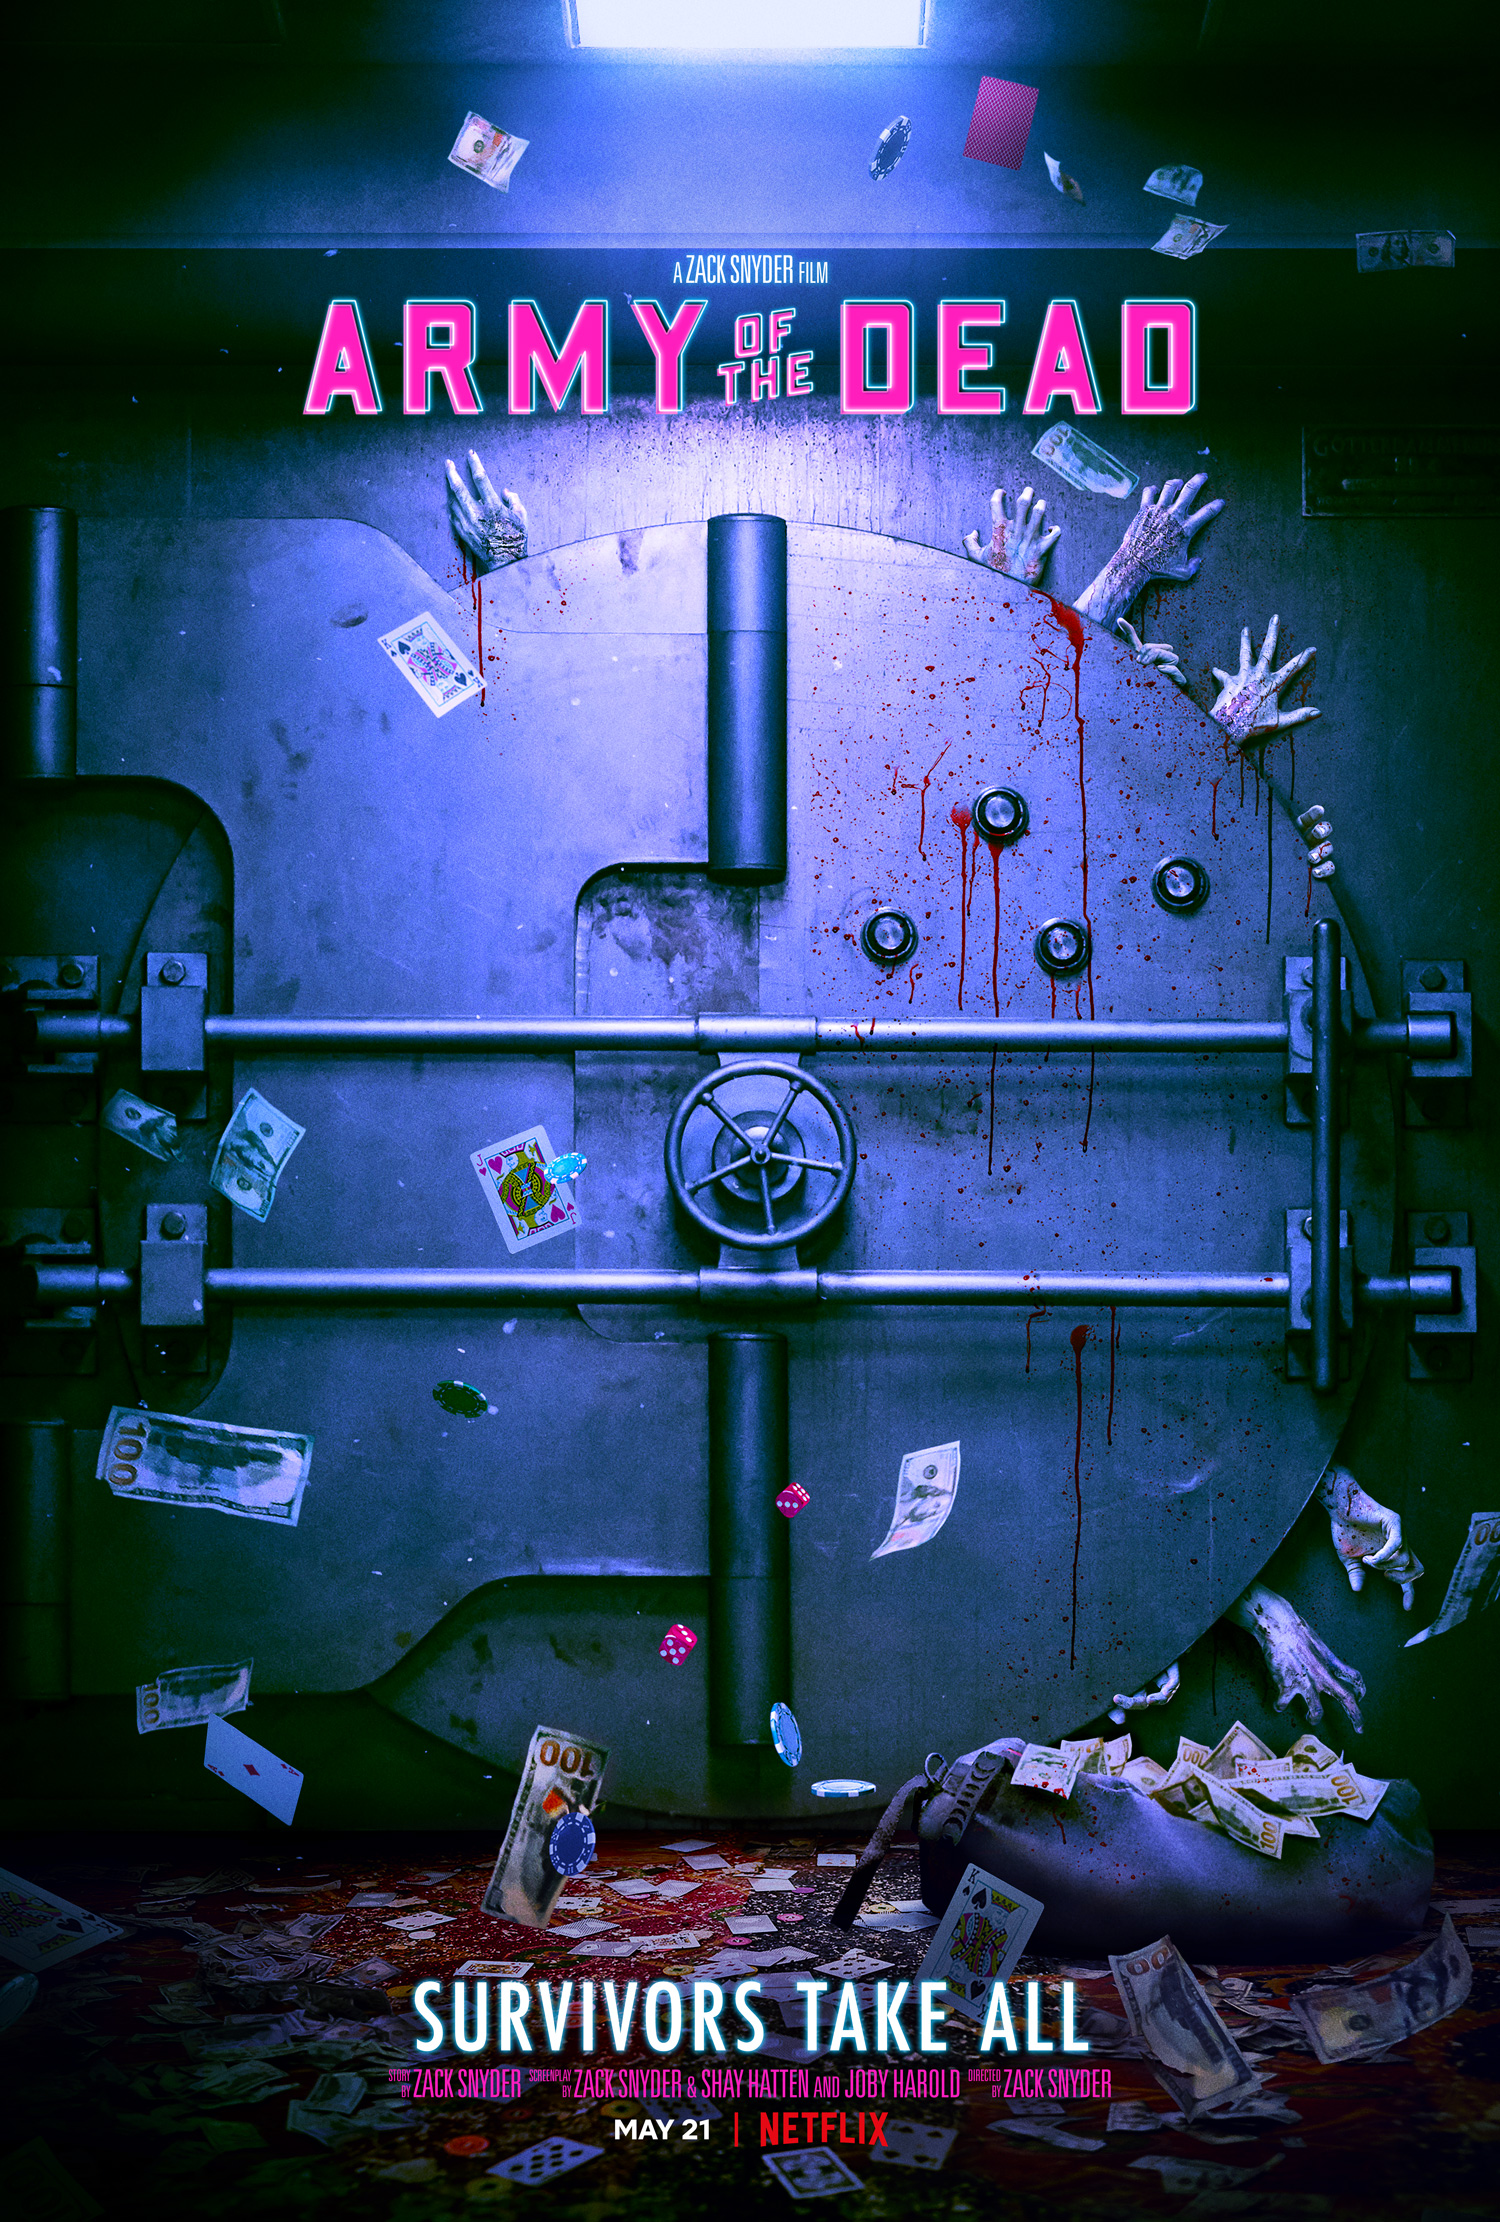 Zack Snyder Army of the Dead poster